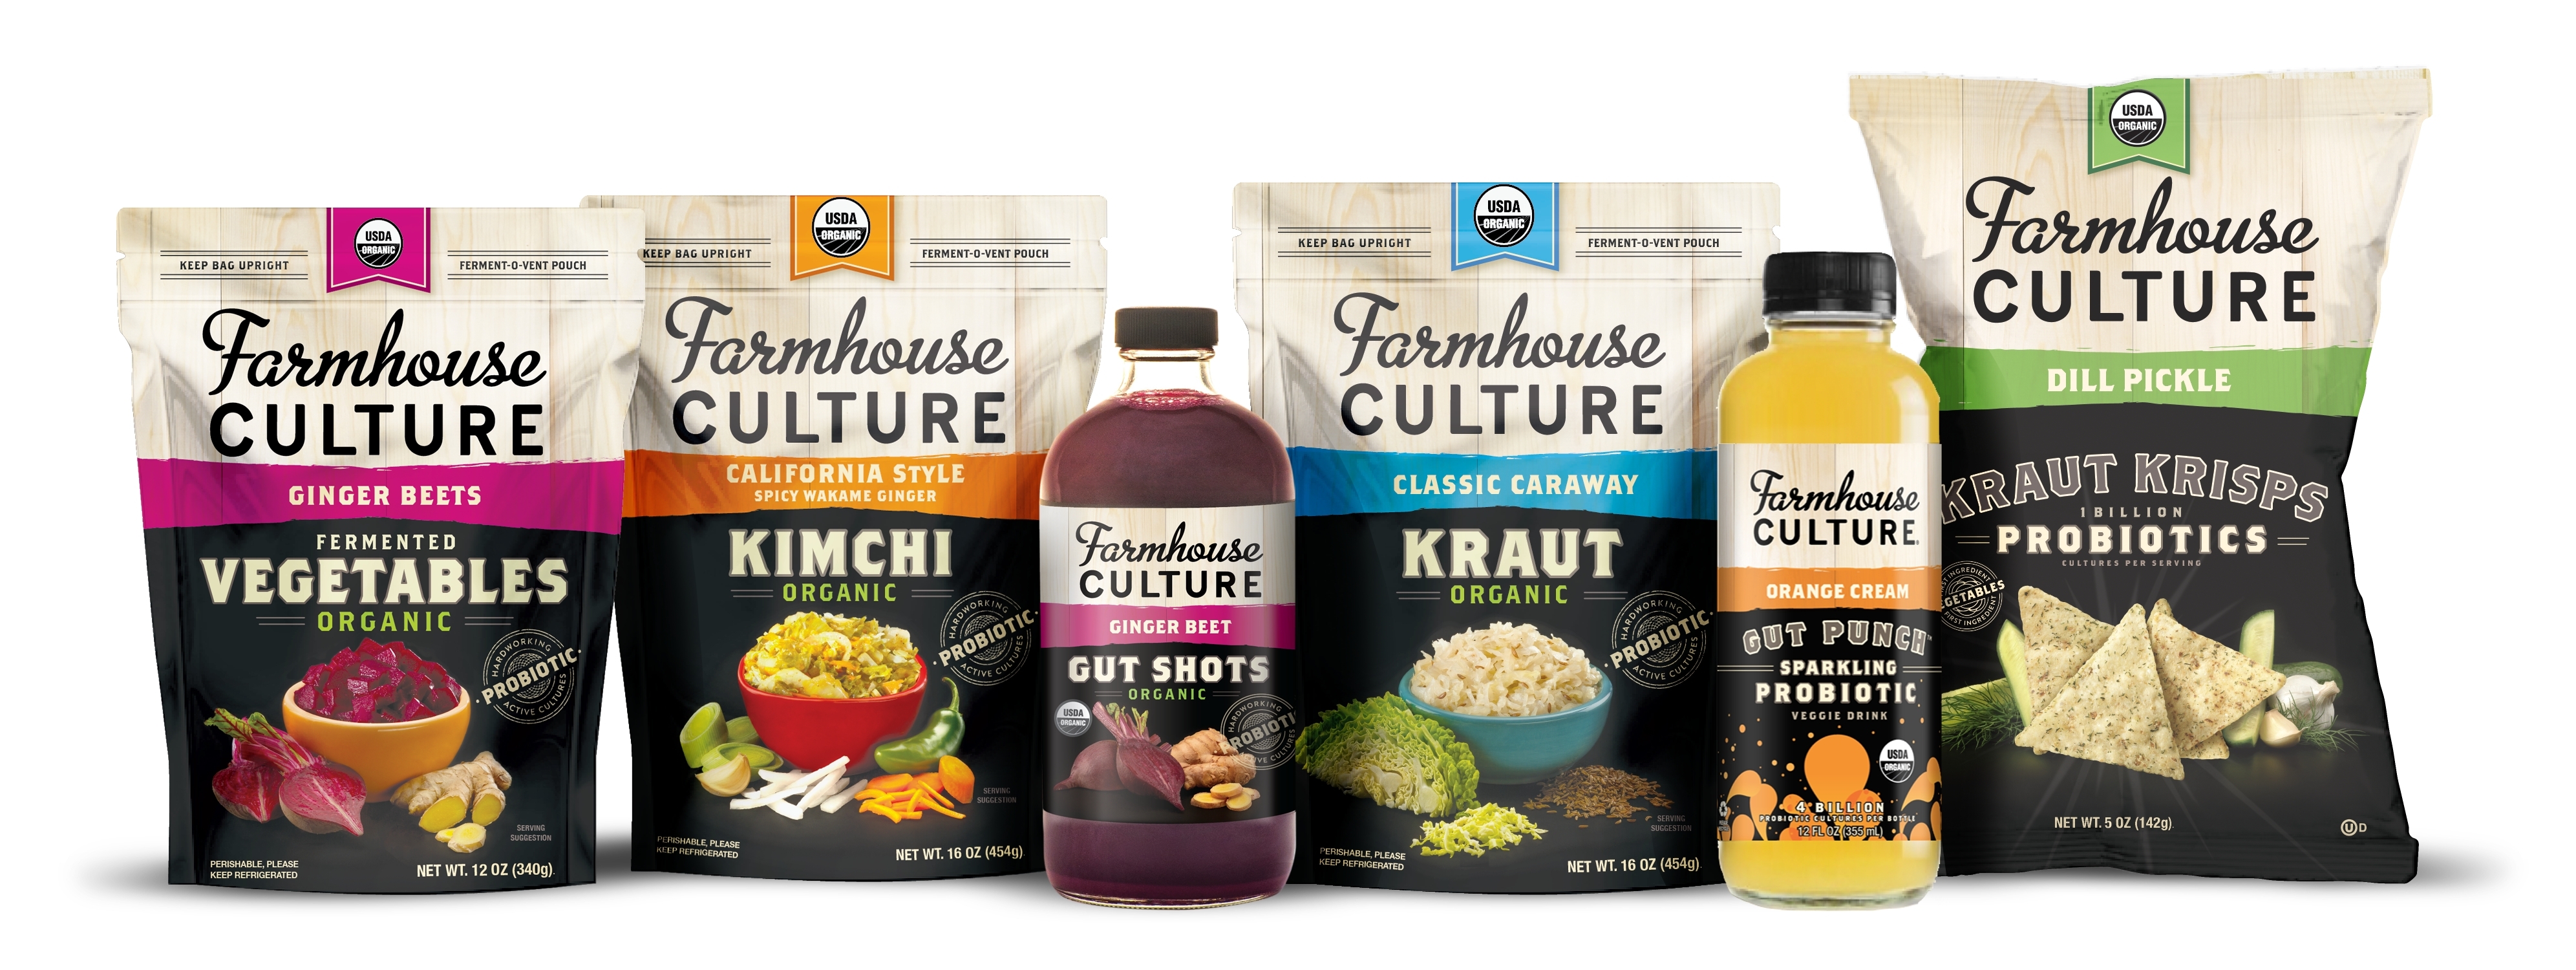 Farmhouse Culture Lands 6 5 Million Investment Led By 301 Inc To Help Fuel National Expansion Of Probiotic Rich Products Business Wire